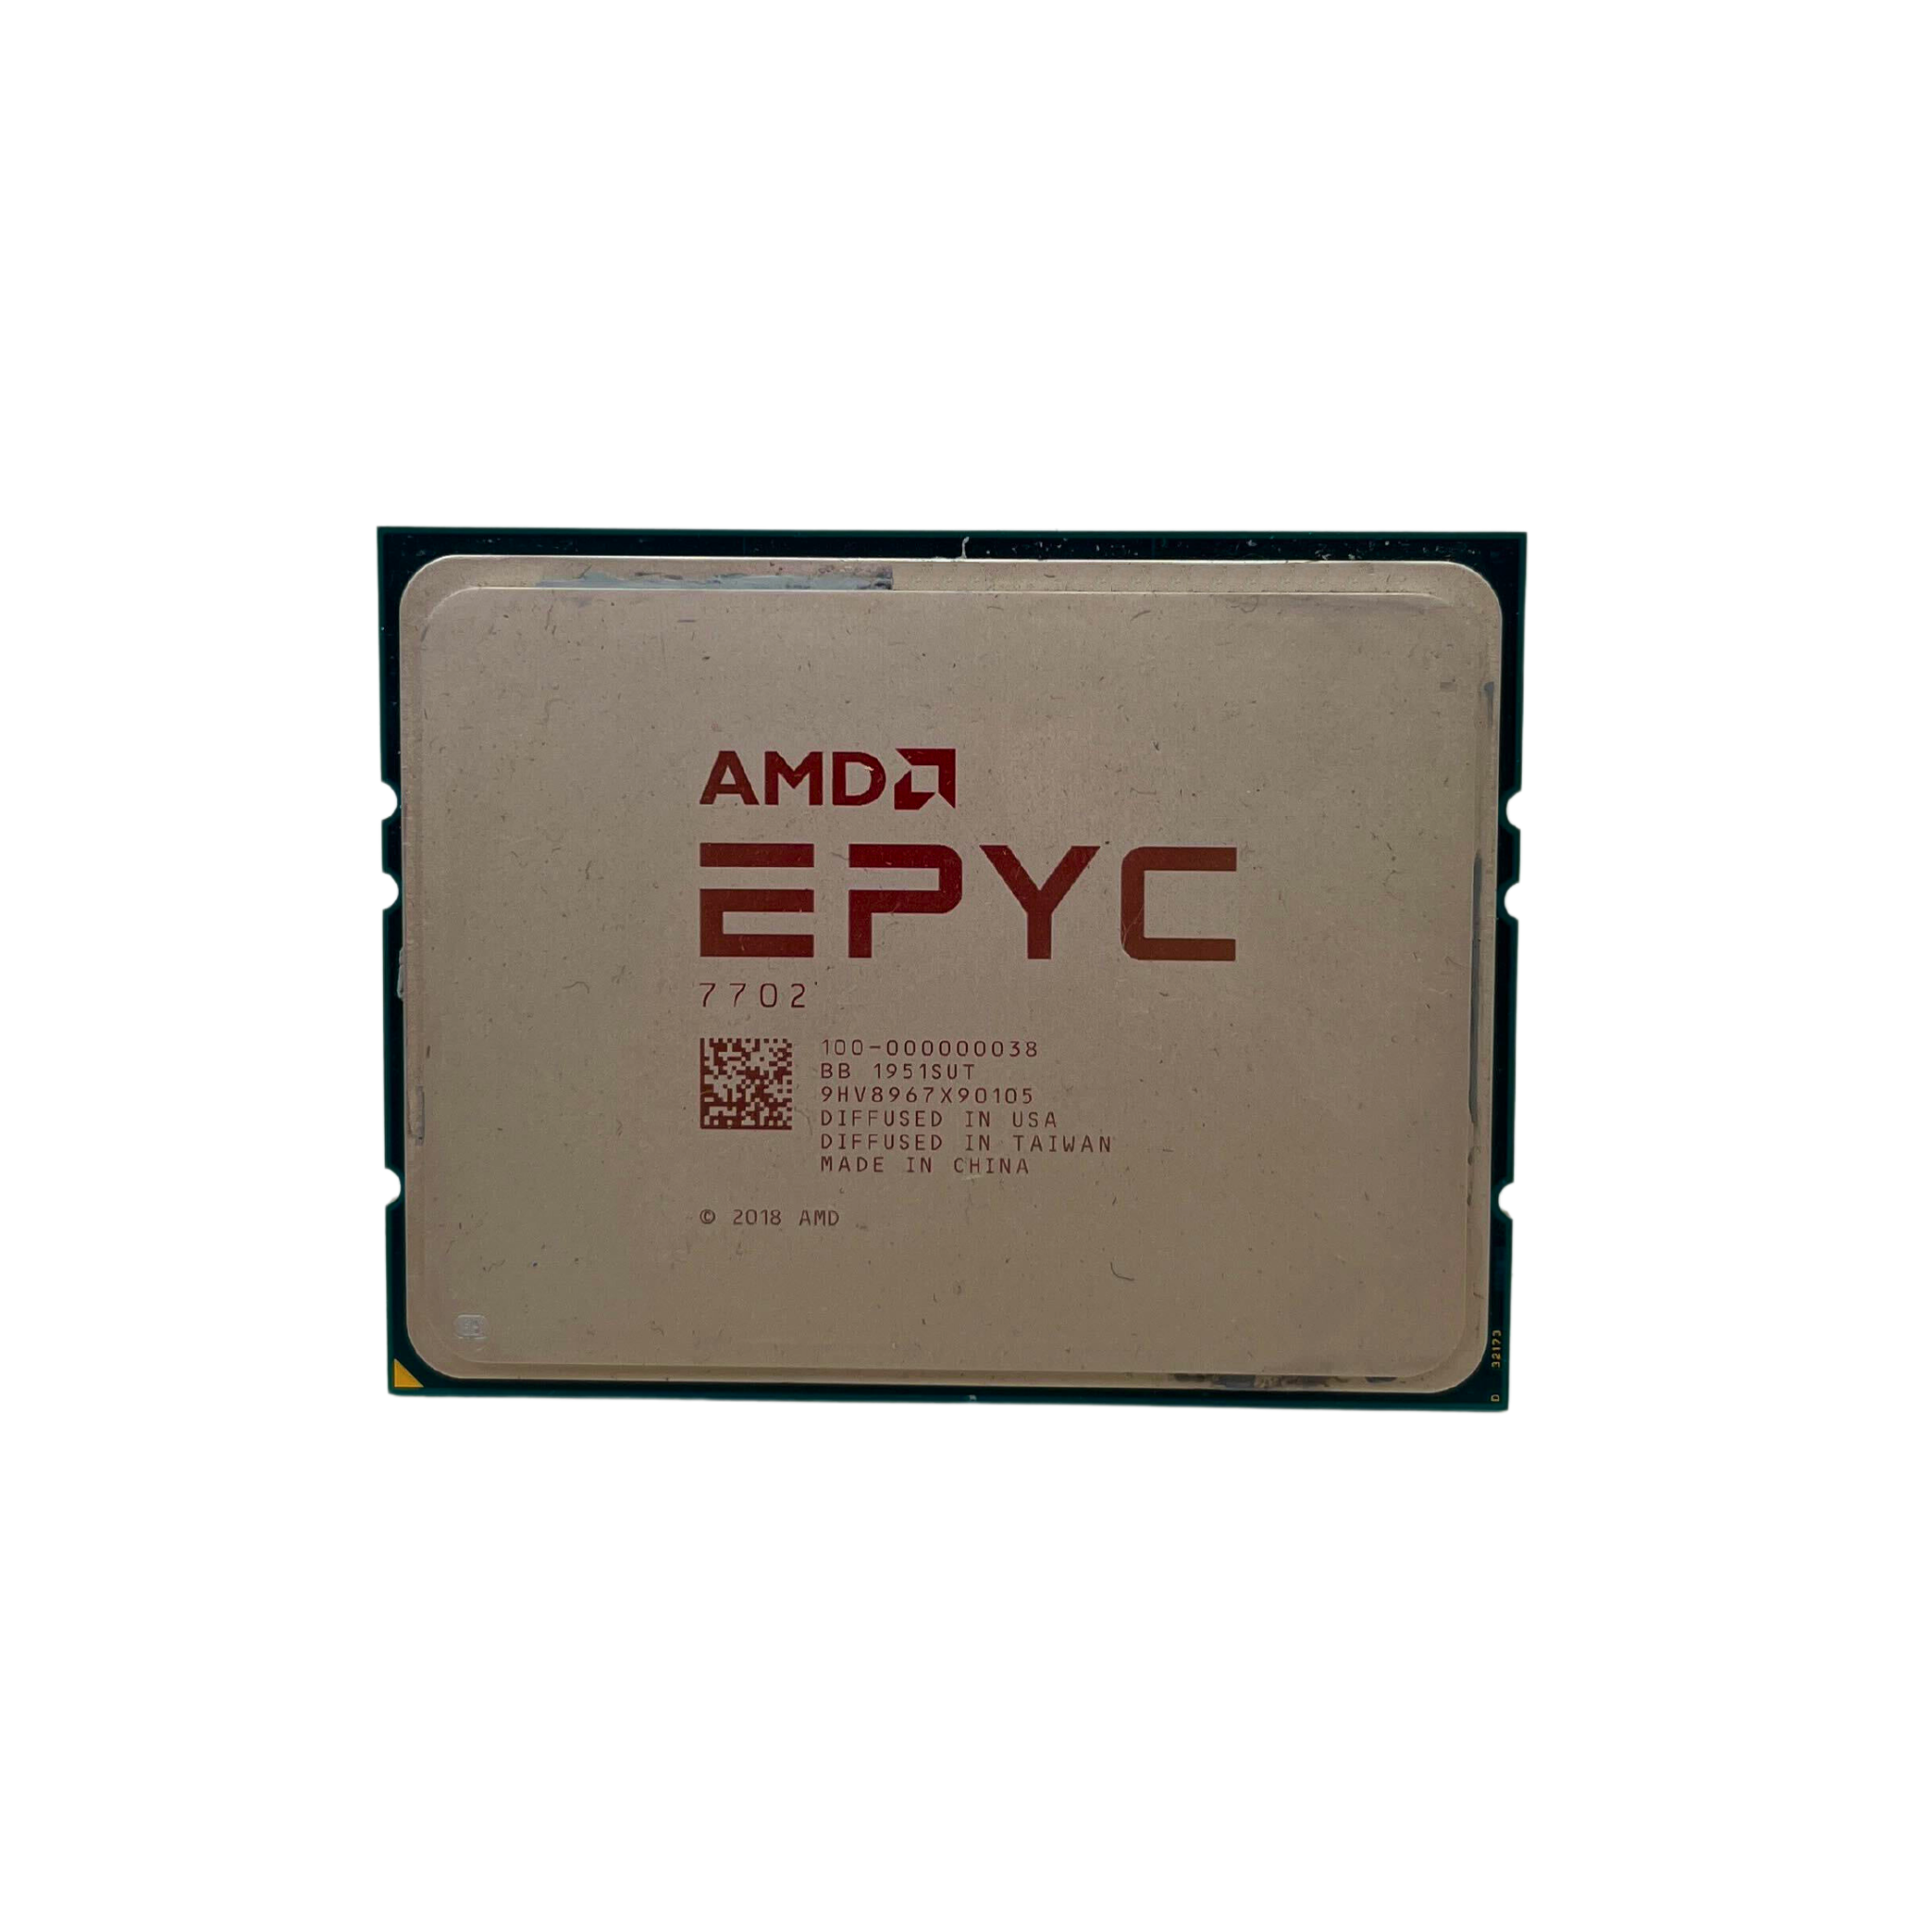 AMD EPYC 7702 Series 64 Core 2.0GHz 256MB L3 Cache Socket SP3 CPU (P17332-001-CPUonly)